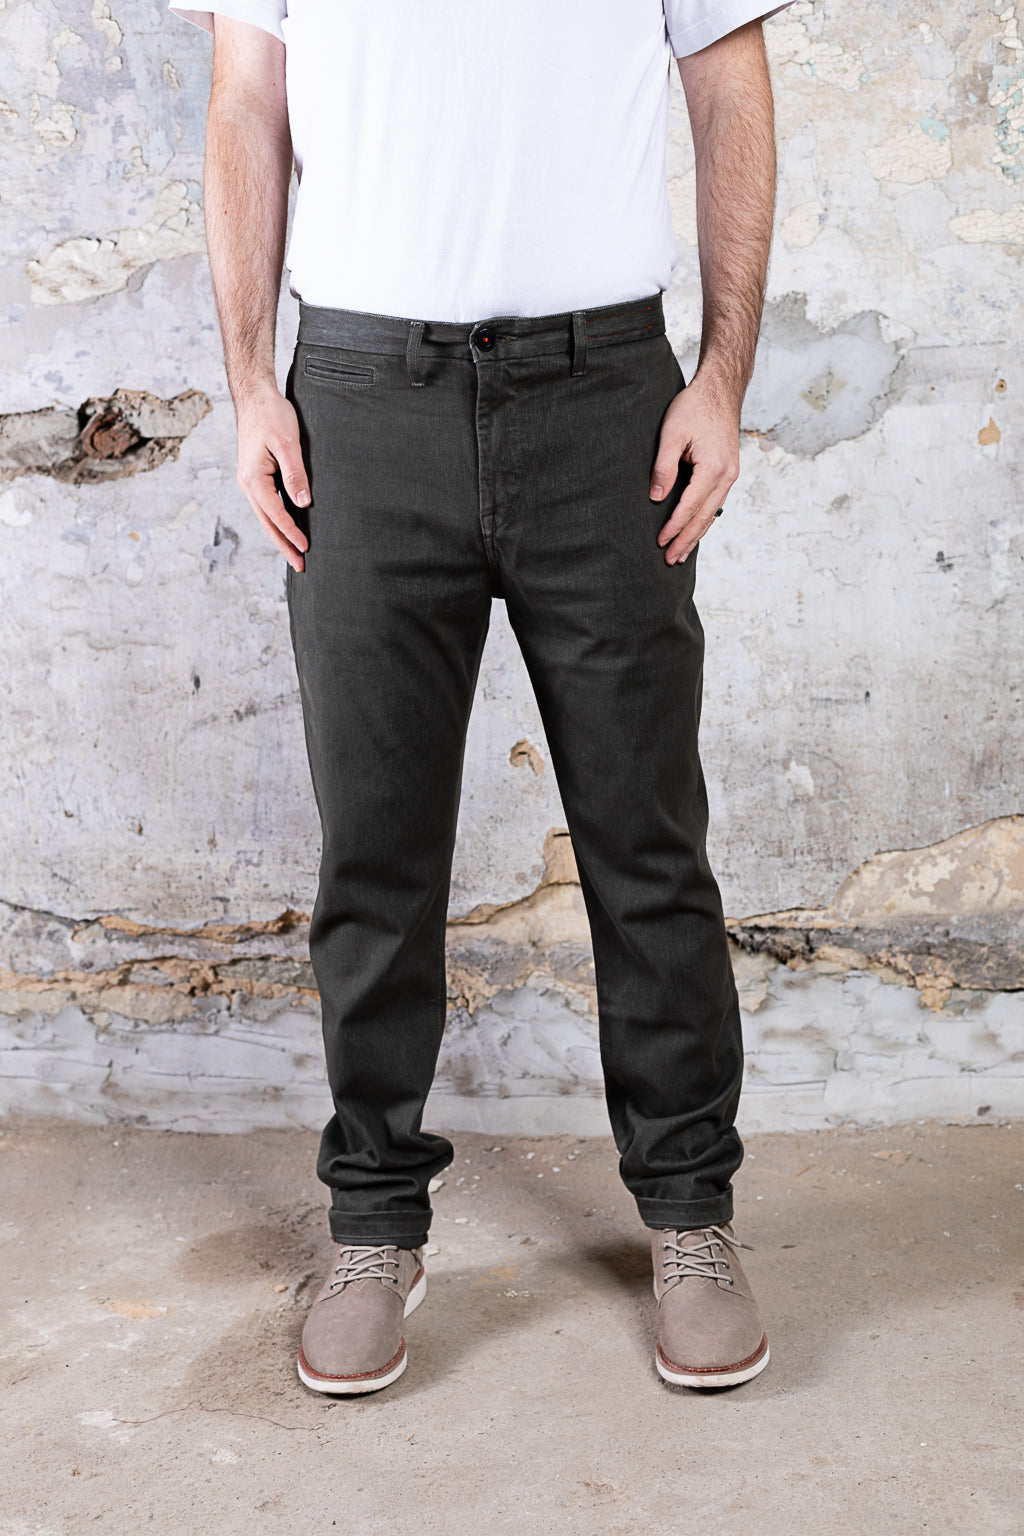 Kato - The Axe Slim French Terry - Military Green-Men&#39;s Pants-Yaletown-Vancouver-Surrey-Canada